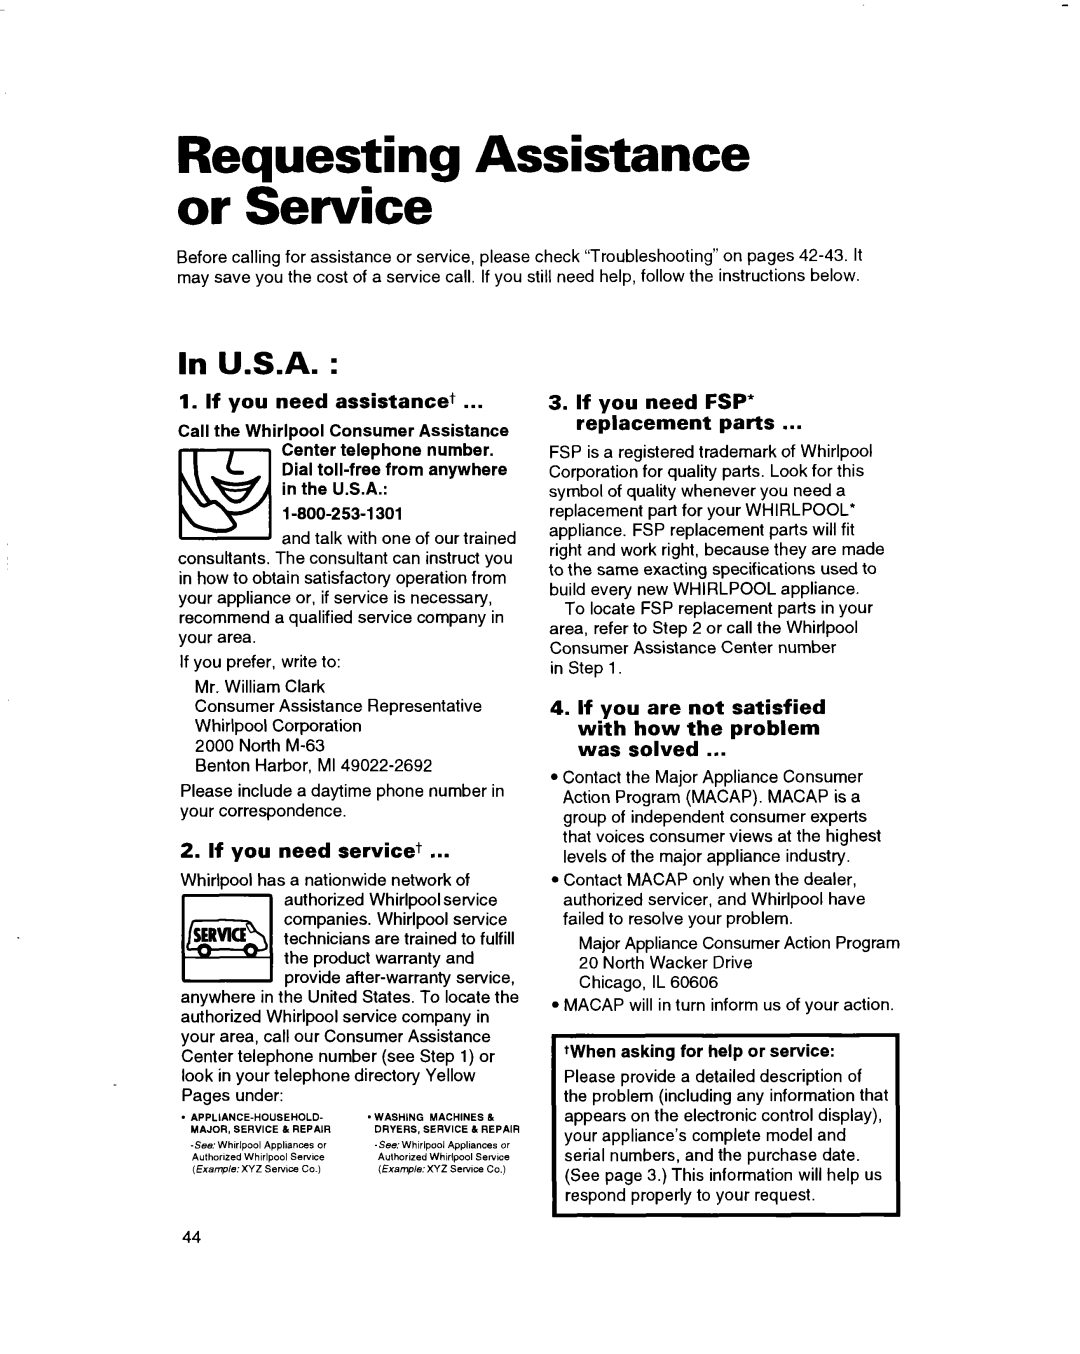 Whirlpool RBD275PD, RBS245PD, RBS305PD, RBS270PD, RBS275PD, RBD245PD, RBD306PD Requesting Assistance or Service, In U.S.A 